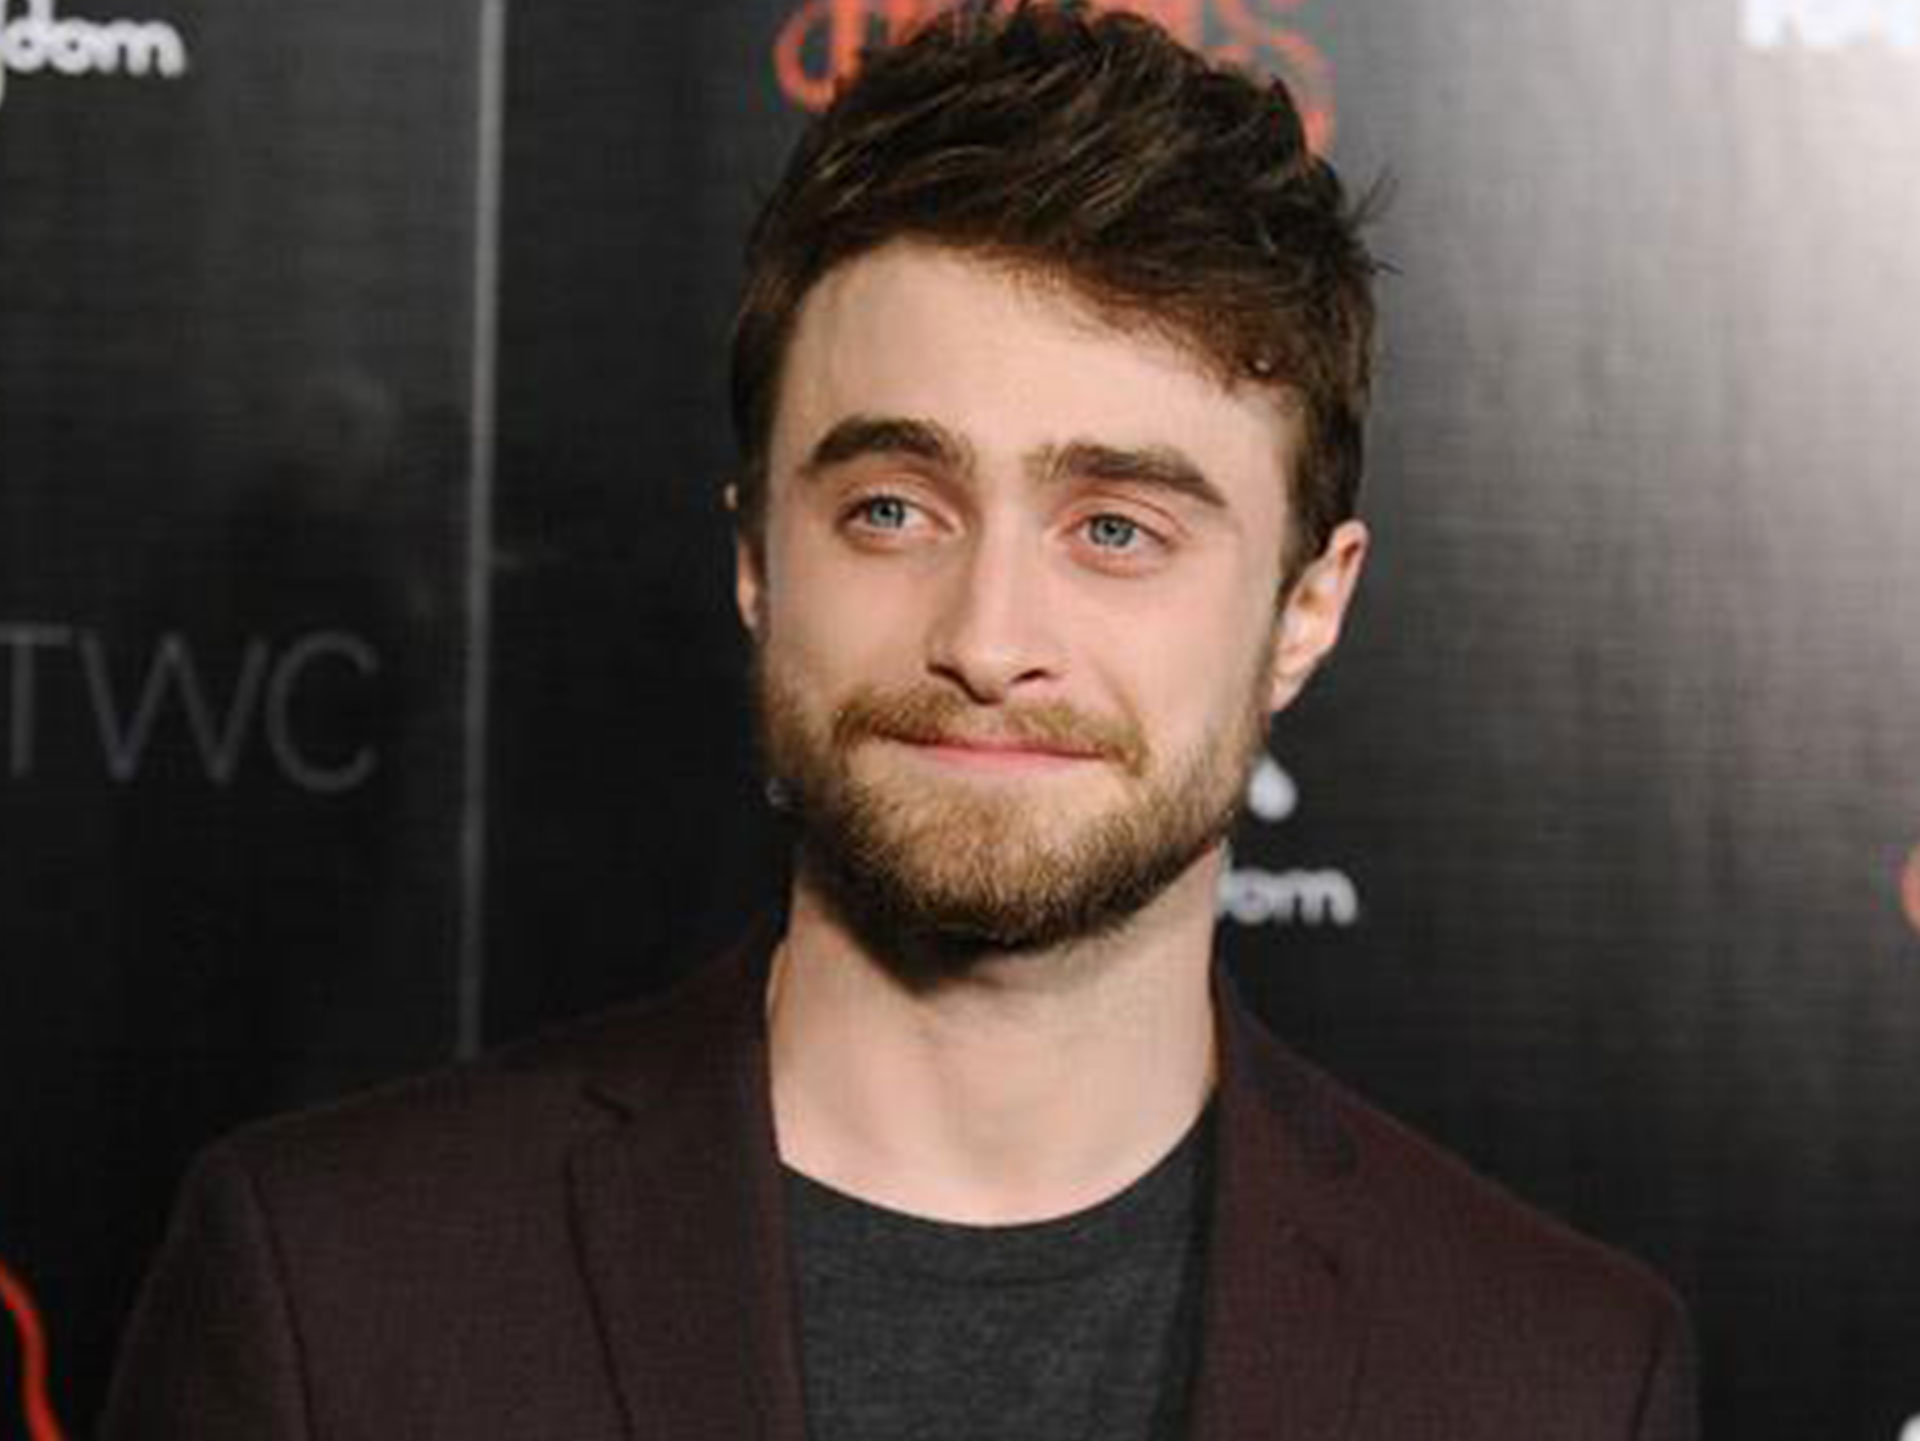 Daniel Radcliffe stays on brand and heroically helps a tourist attacked on the street